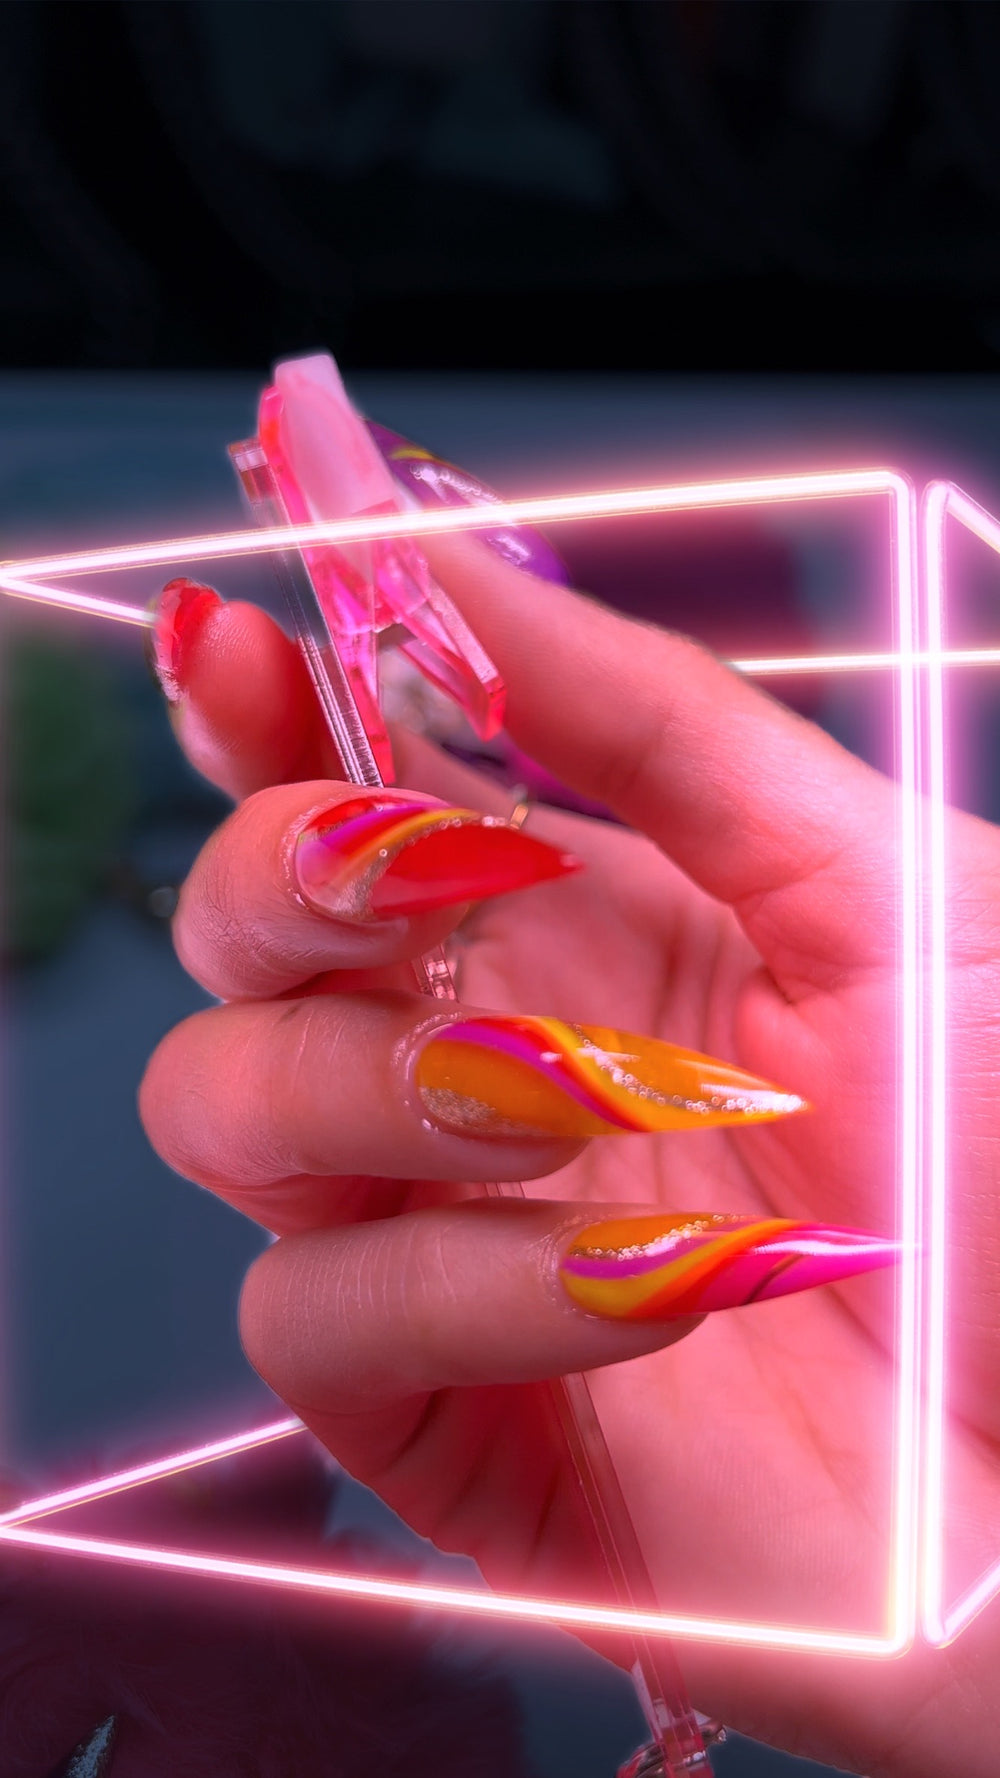 Boujie Card Grabbers, For Long Nails Use A Card Grabber, Assists With  Credit Card Transactions